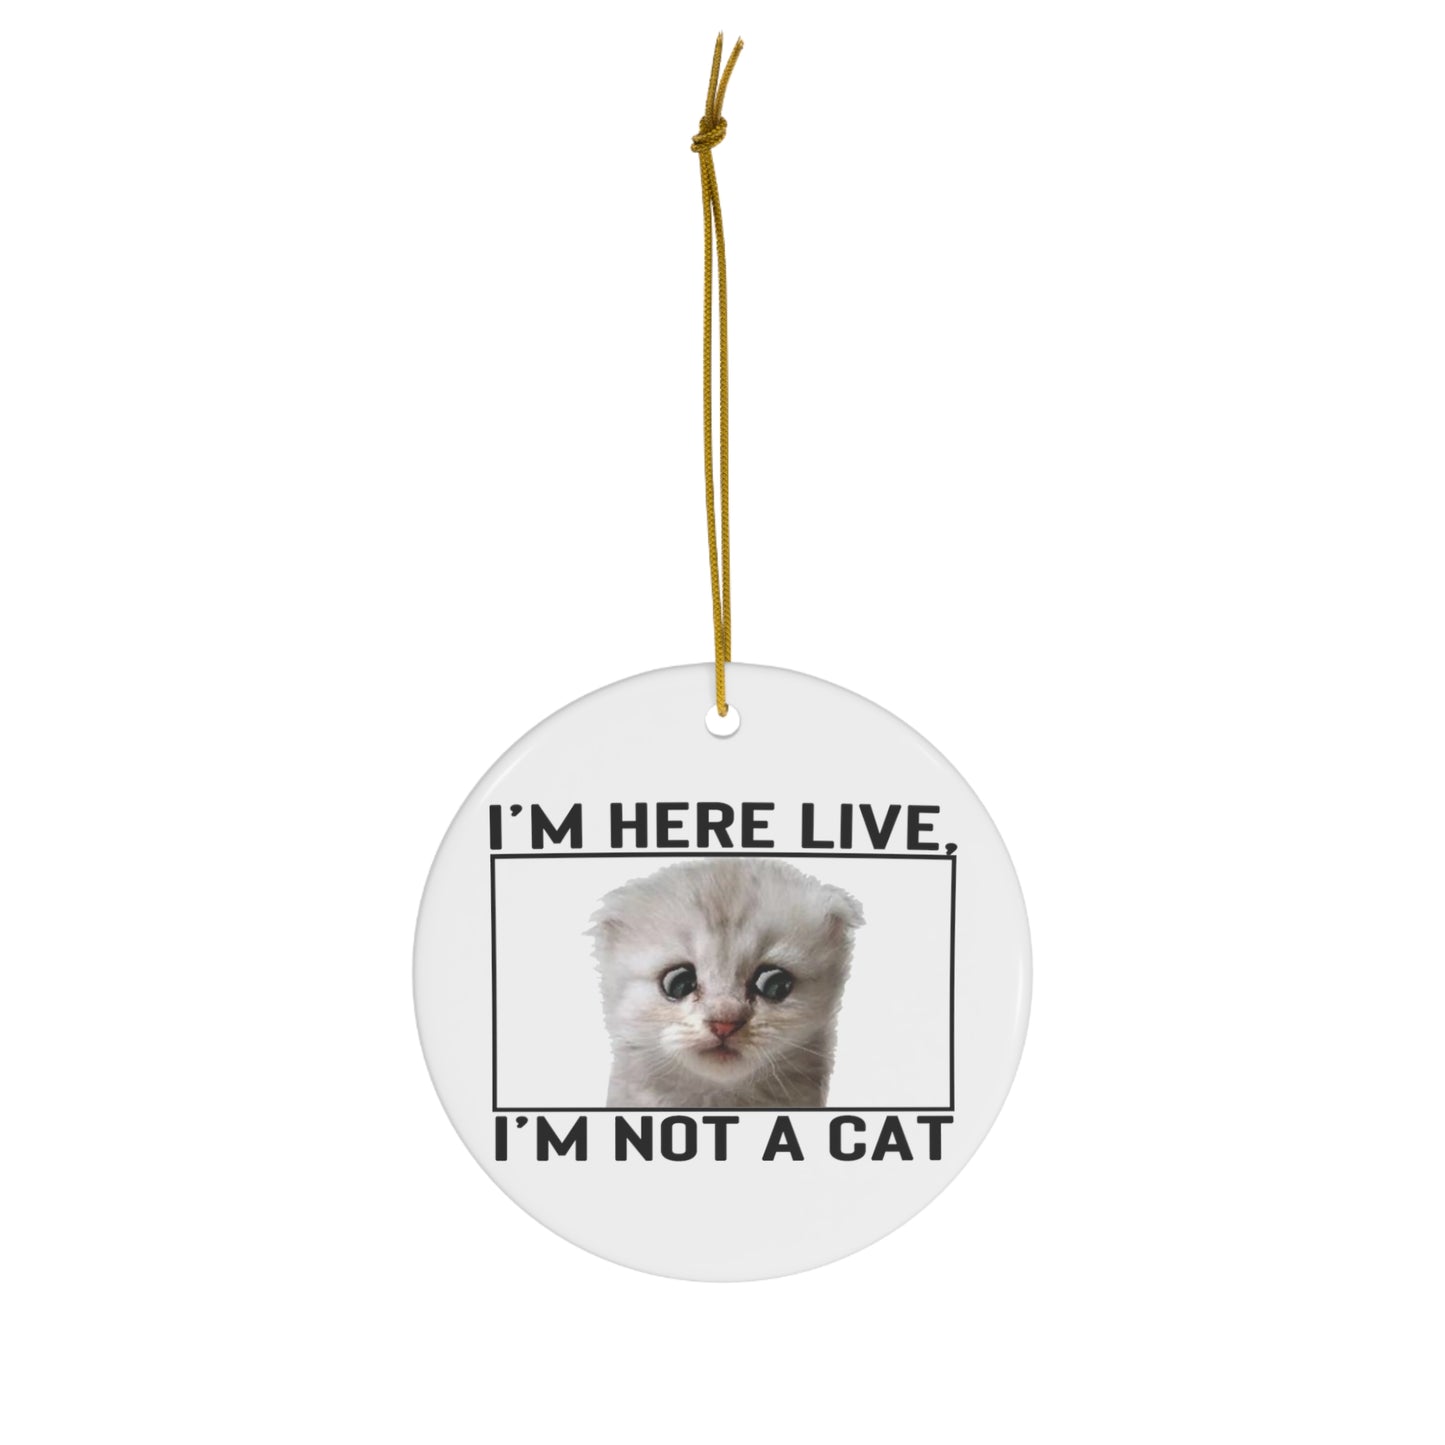 Zoom Lawyer Cat Ornament 2021 Zoom Cat Meme - Funny Lawyer Zoom Judge Call as Cat - I'm not a cat Ornament